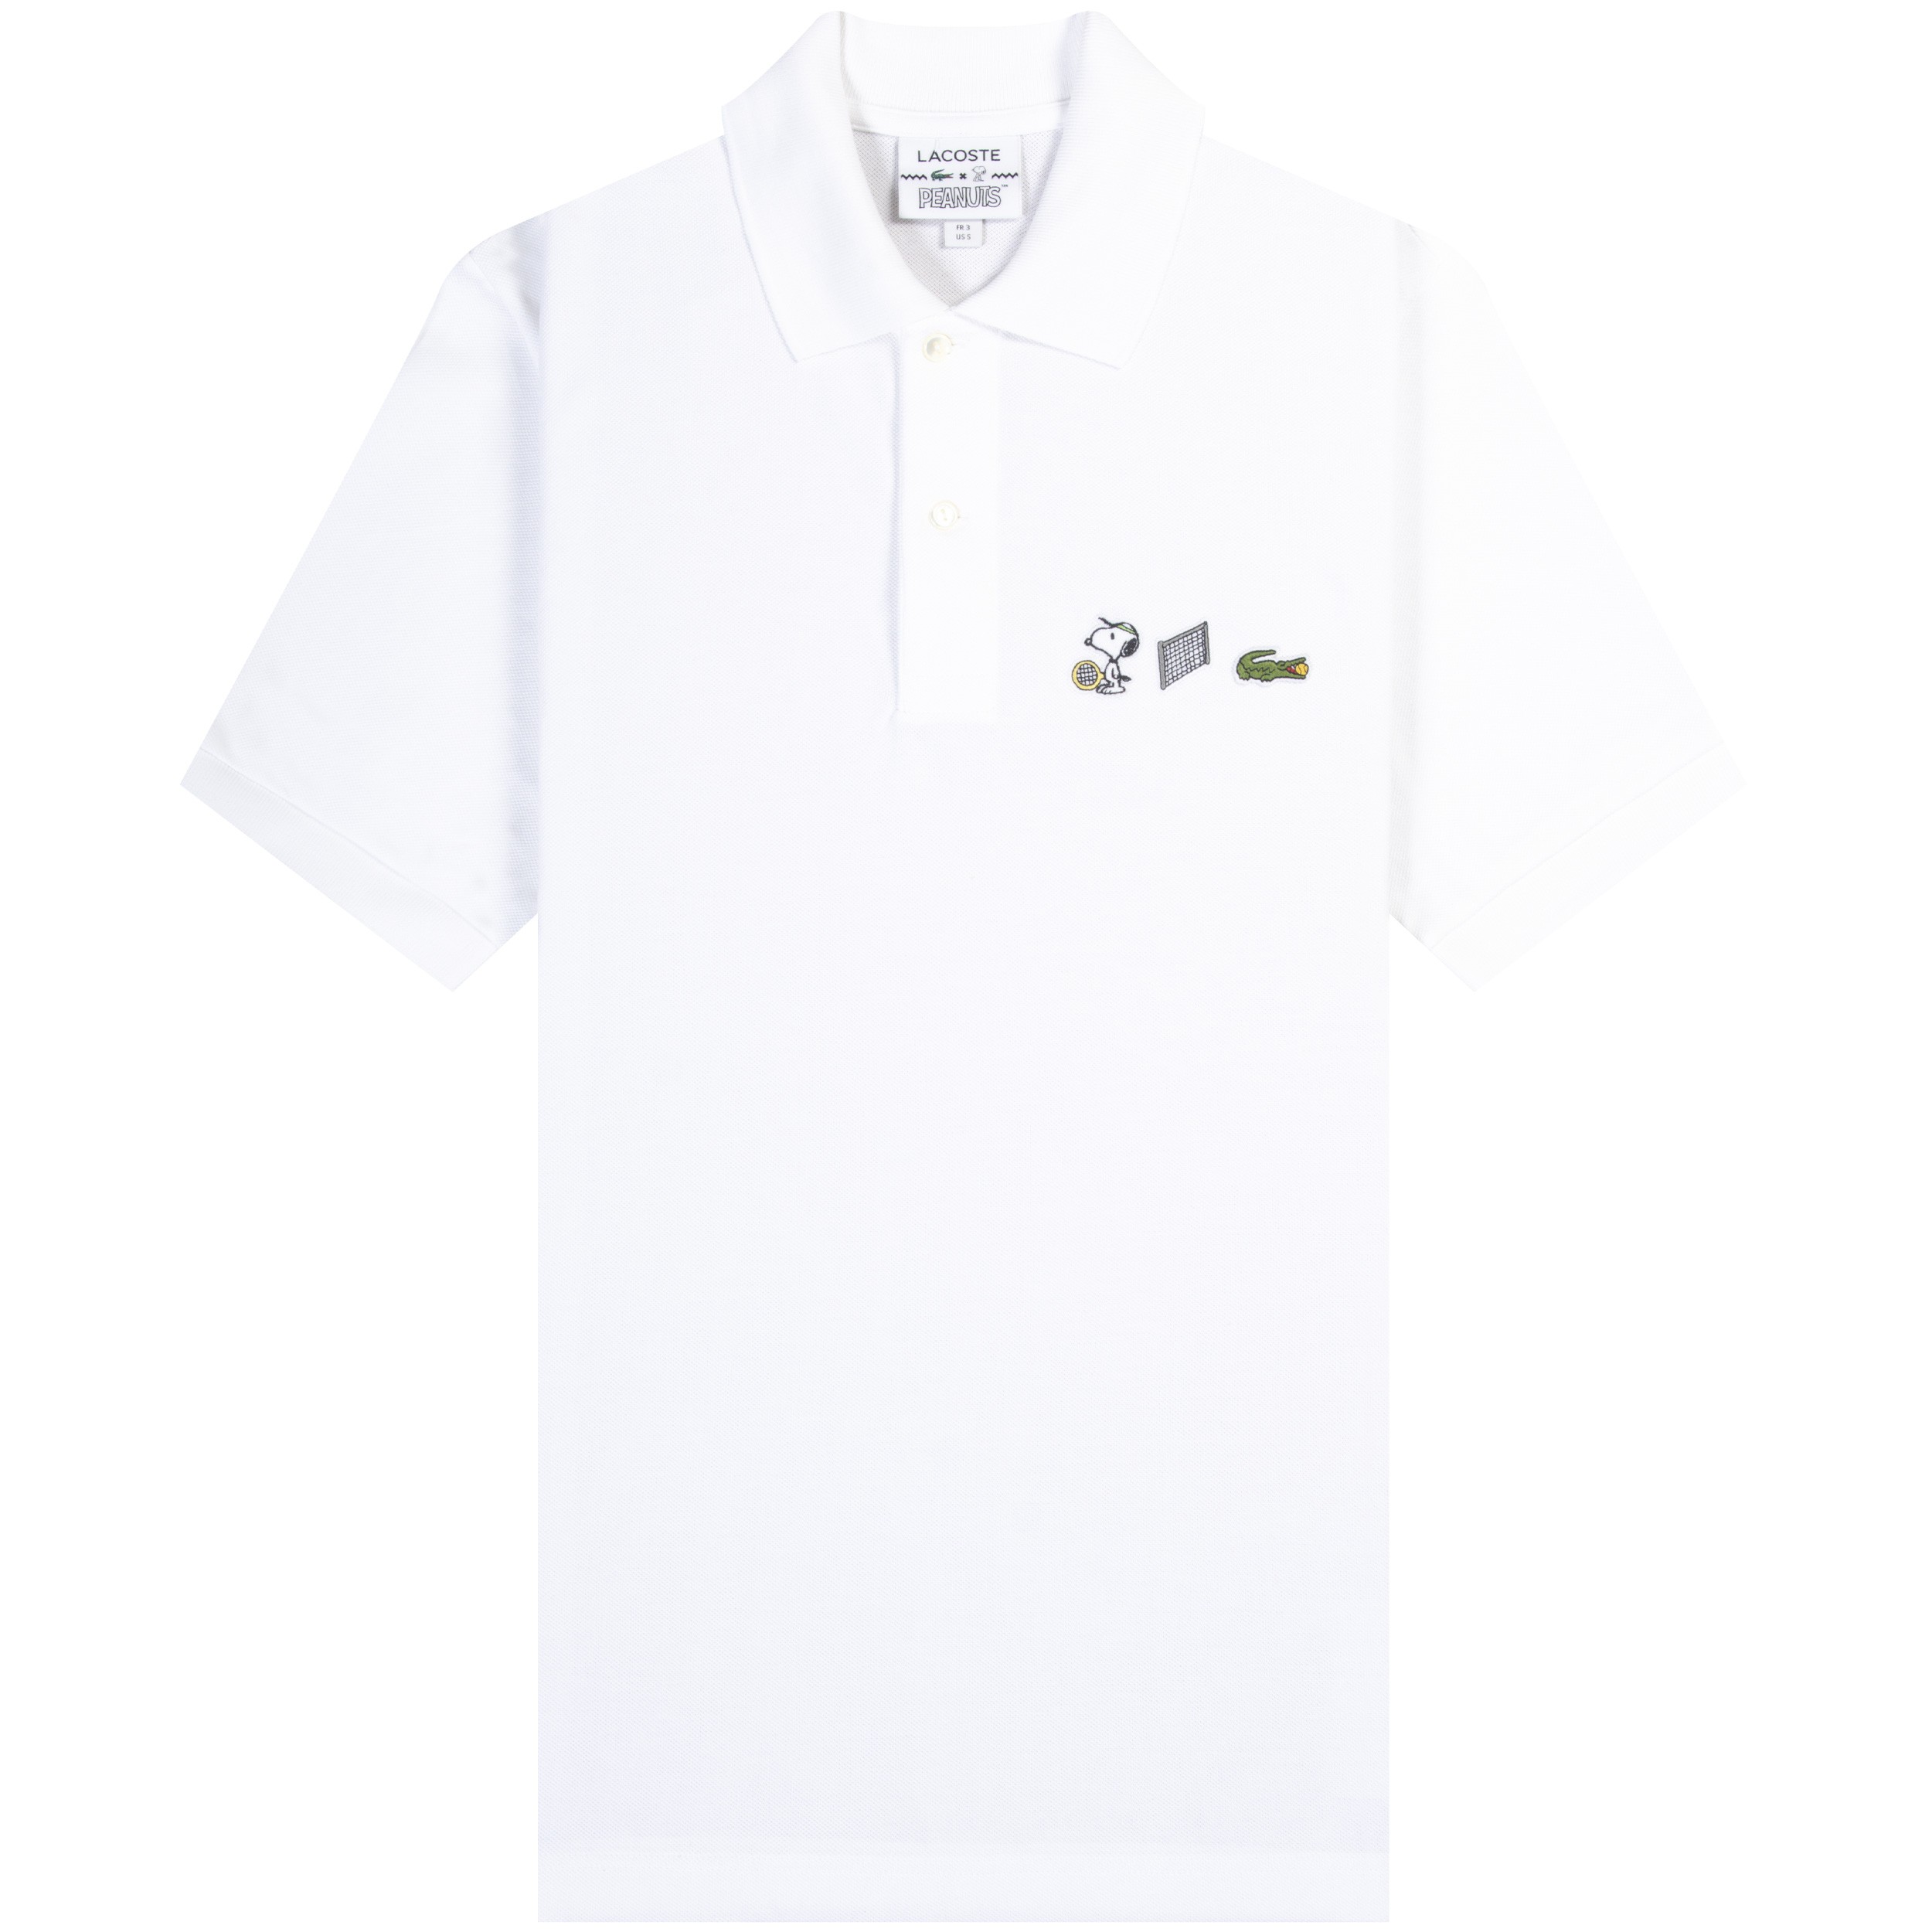 Lacoste X Peanuts 'EMBROIDERED' SNOOPY VS CROC TENNIS MATCH LOGO POLO WHITE